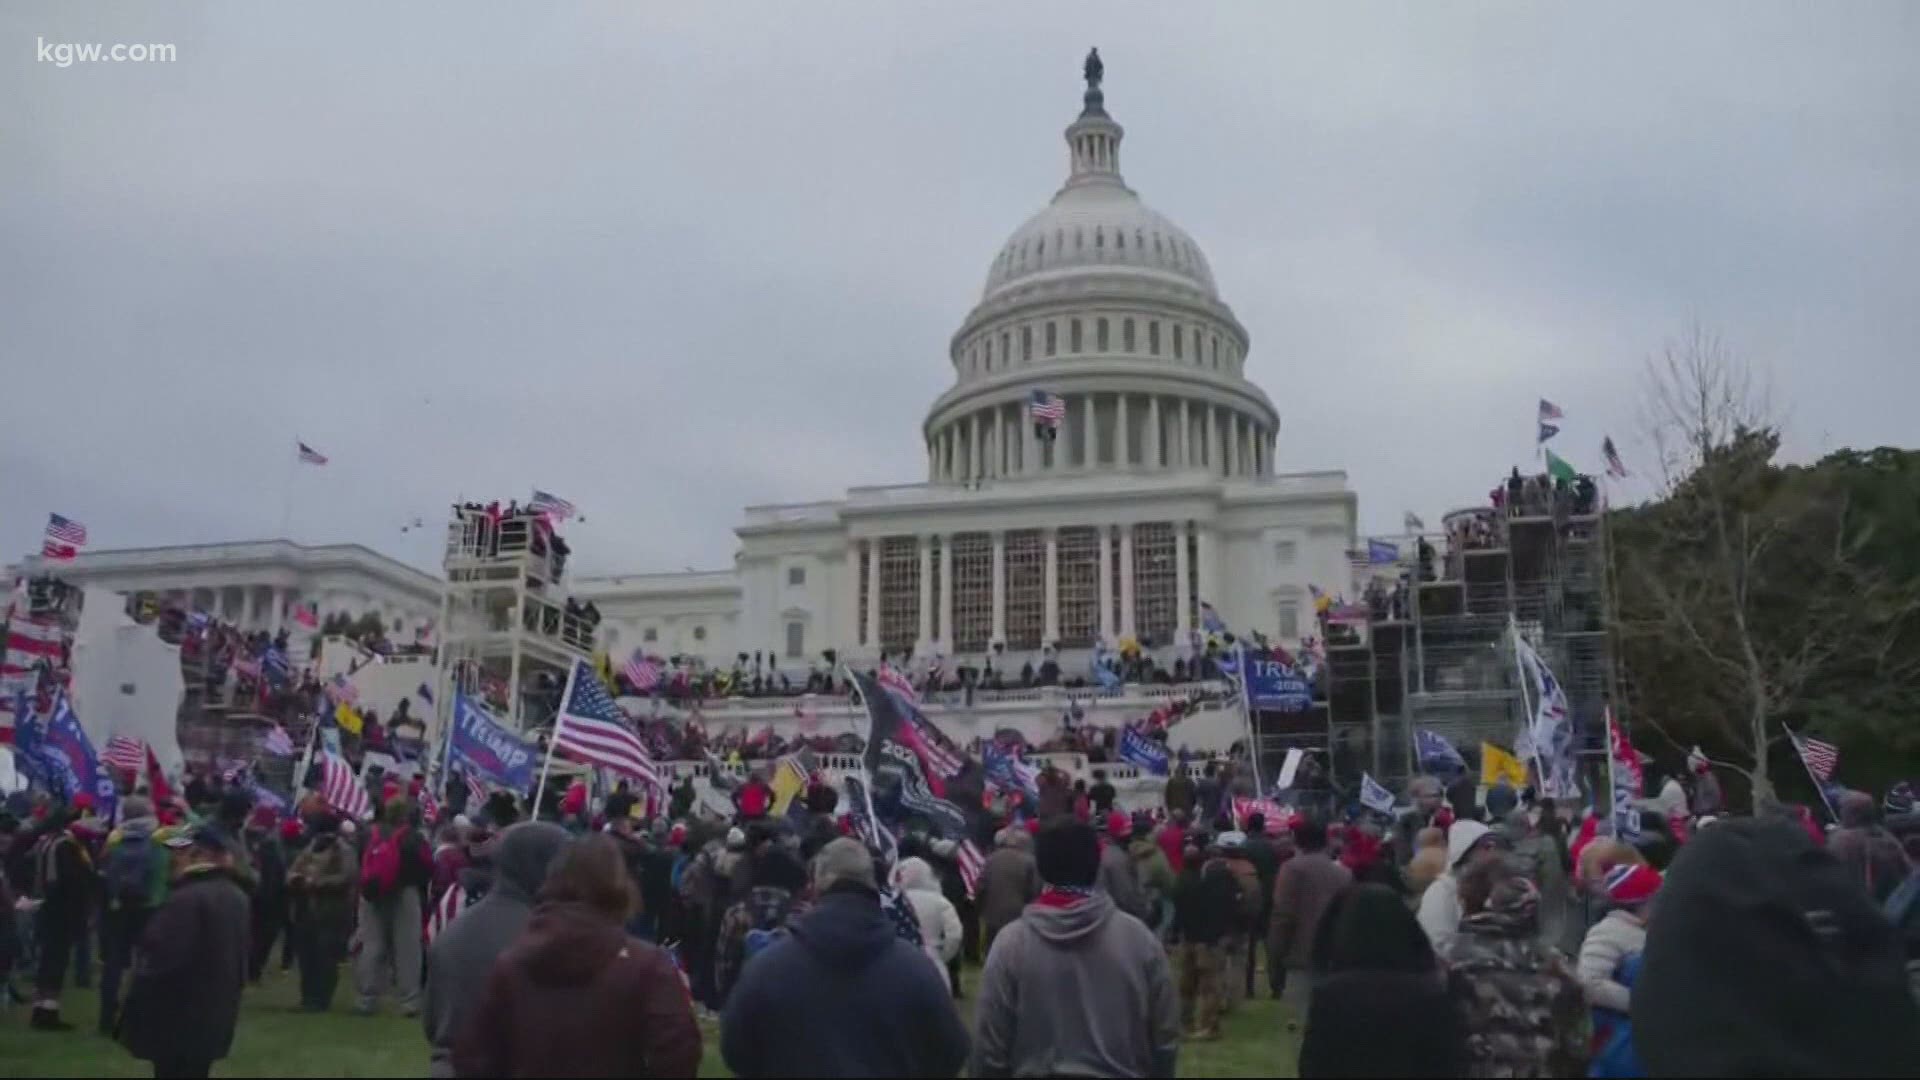 Three people from Oregon were among those arrested after a violent mob stormed the U.S. Capitol in Washington, D.C.